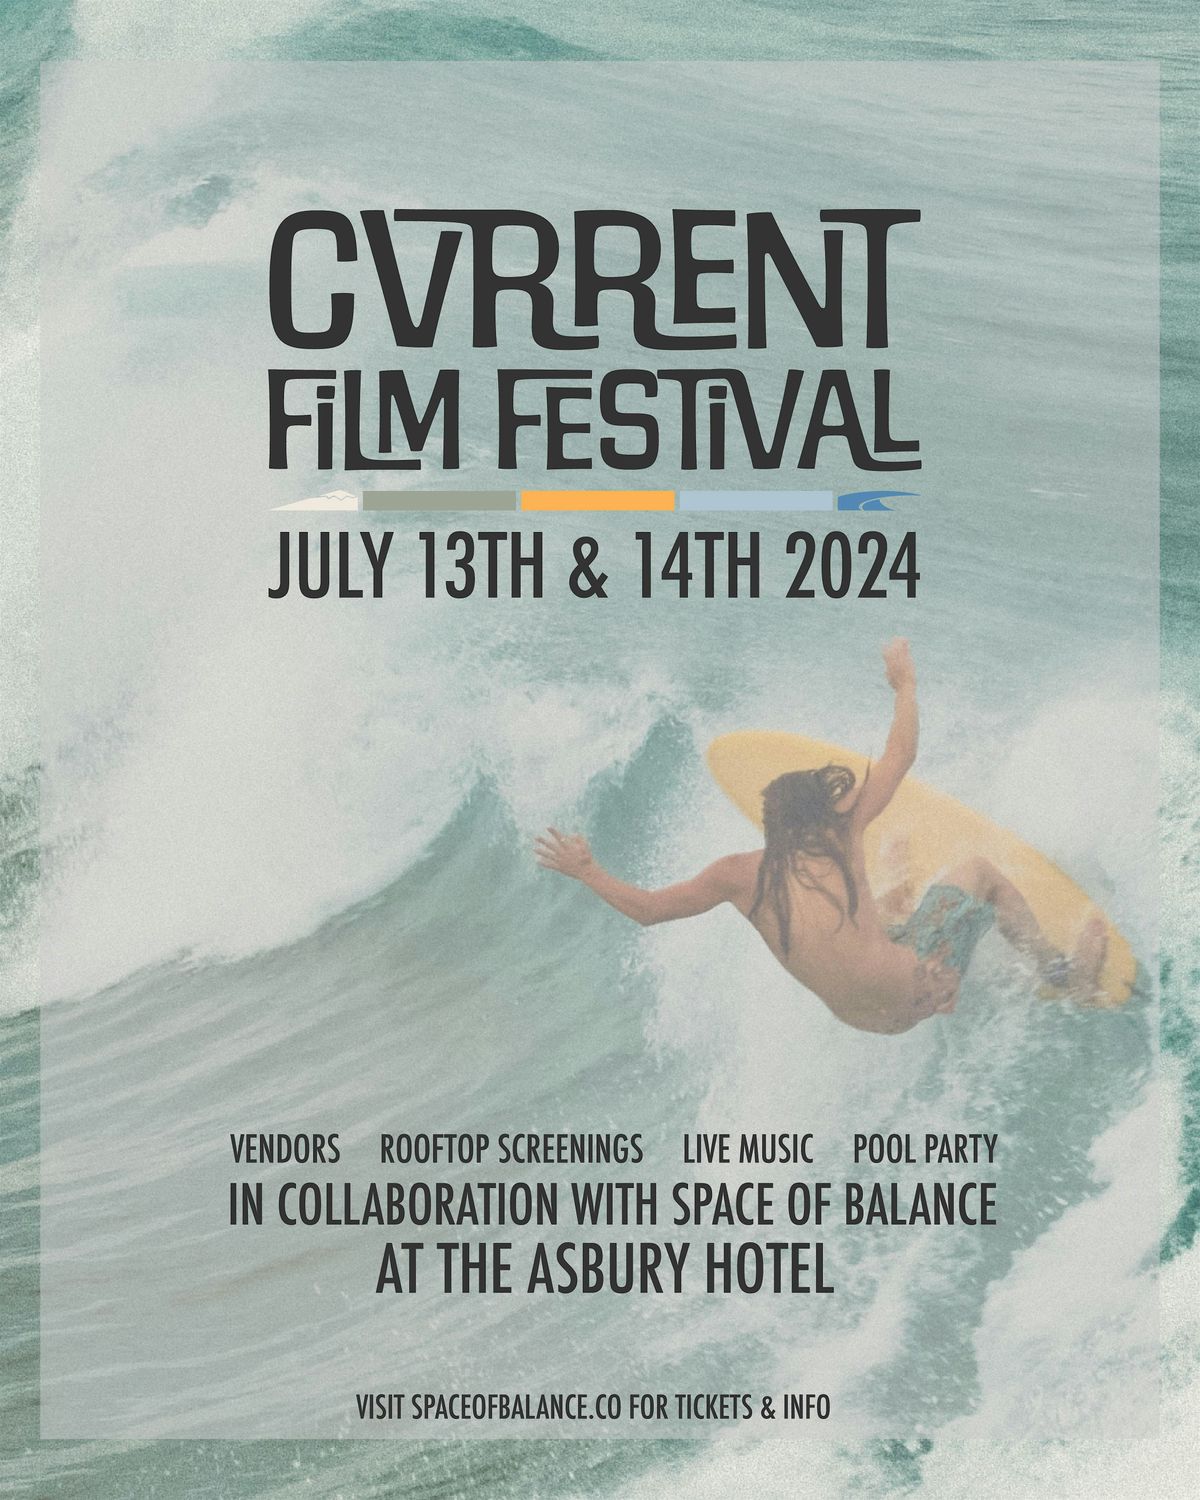 CVRRENT FILM FESTIVAL In Collaboration with Space of Balance